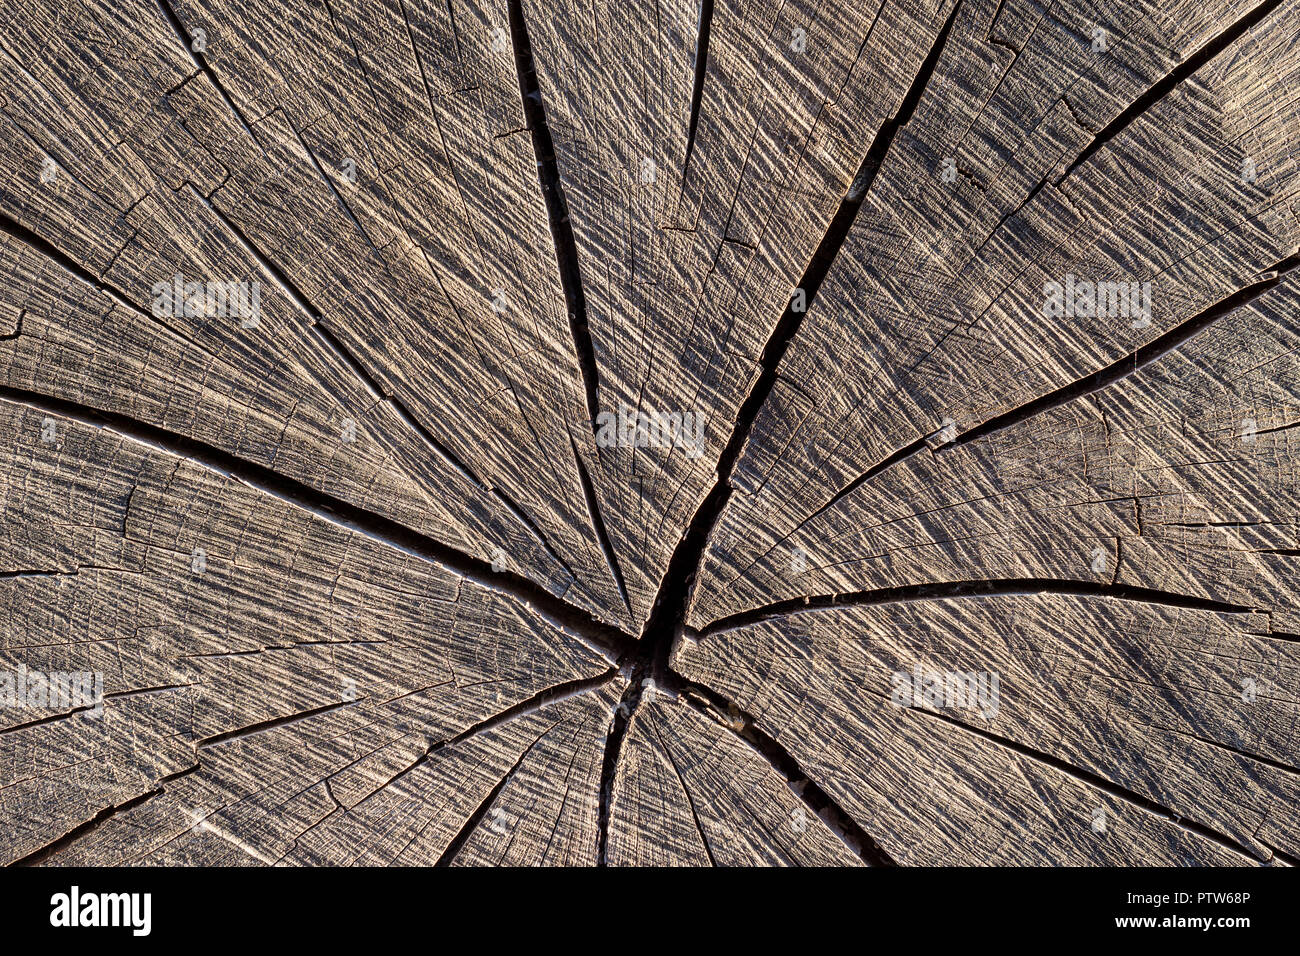 End grain of tree trunk showing drying splits. Stock Photo